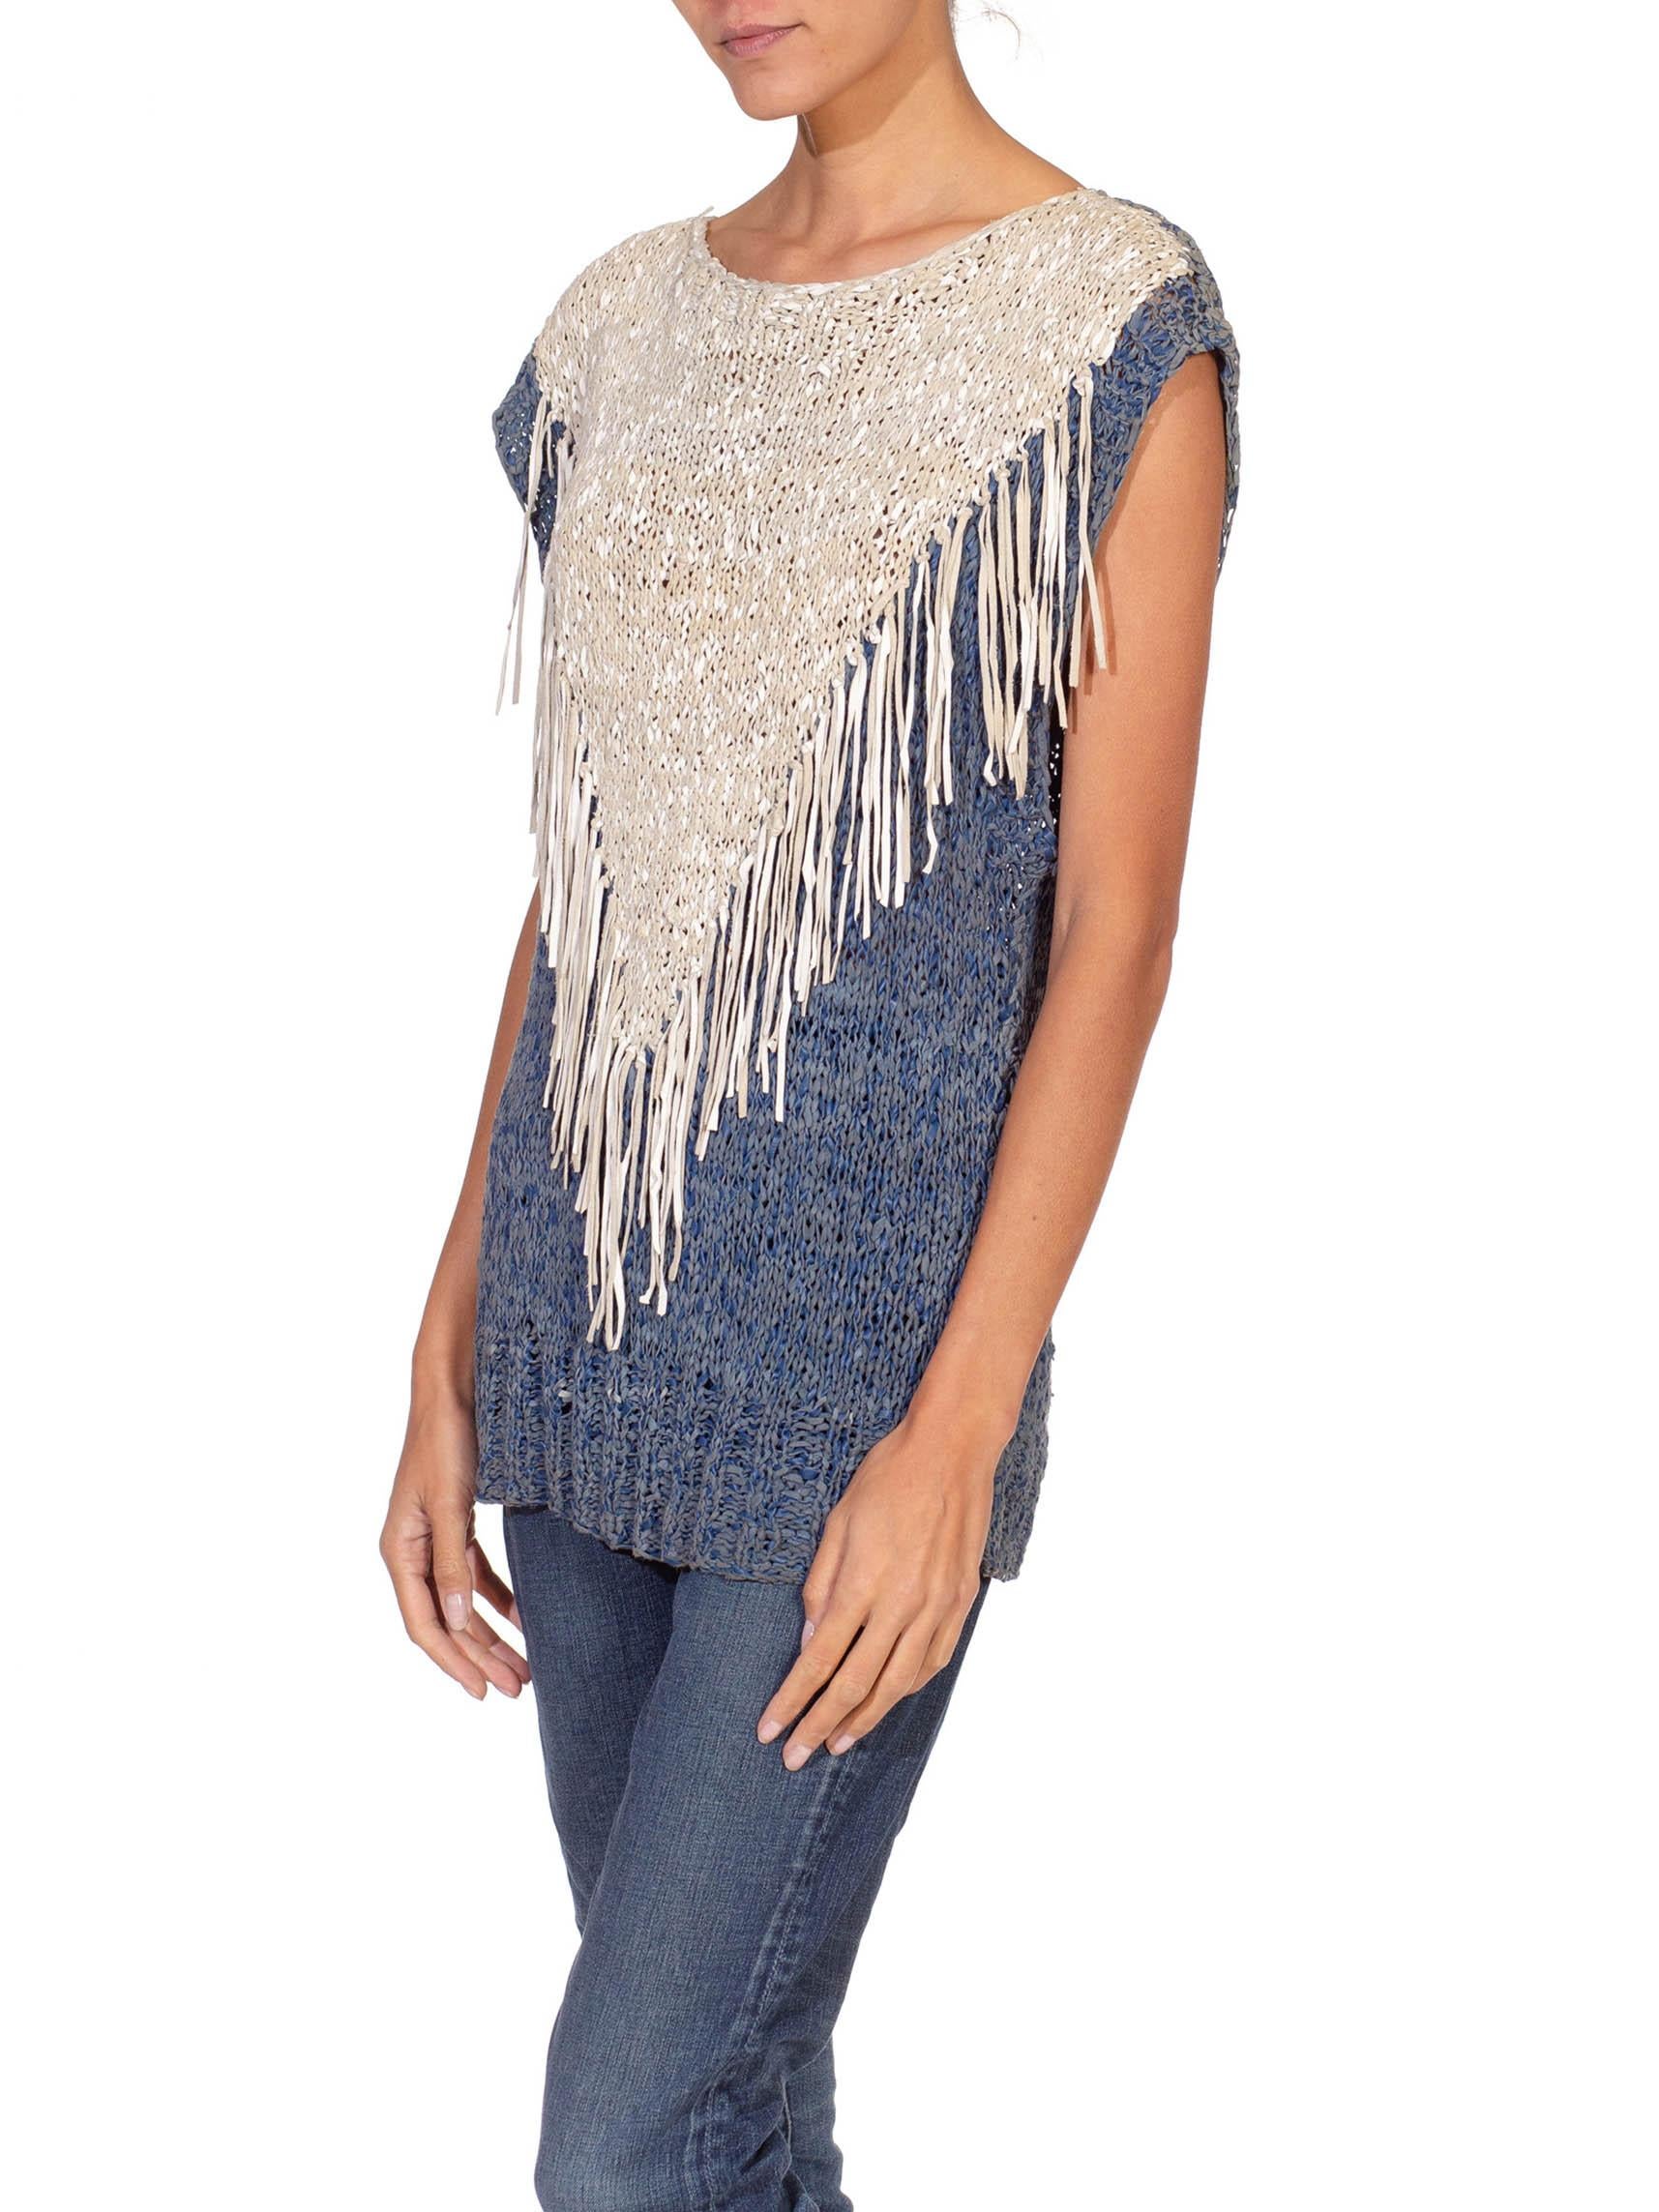 1970S Blue & White Suede Knit Leather Strips Top With Fringe In Excellent Condition For Sale In New York, NY